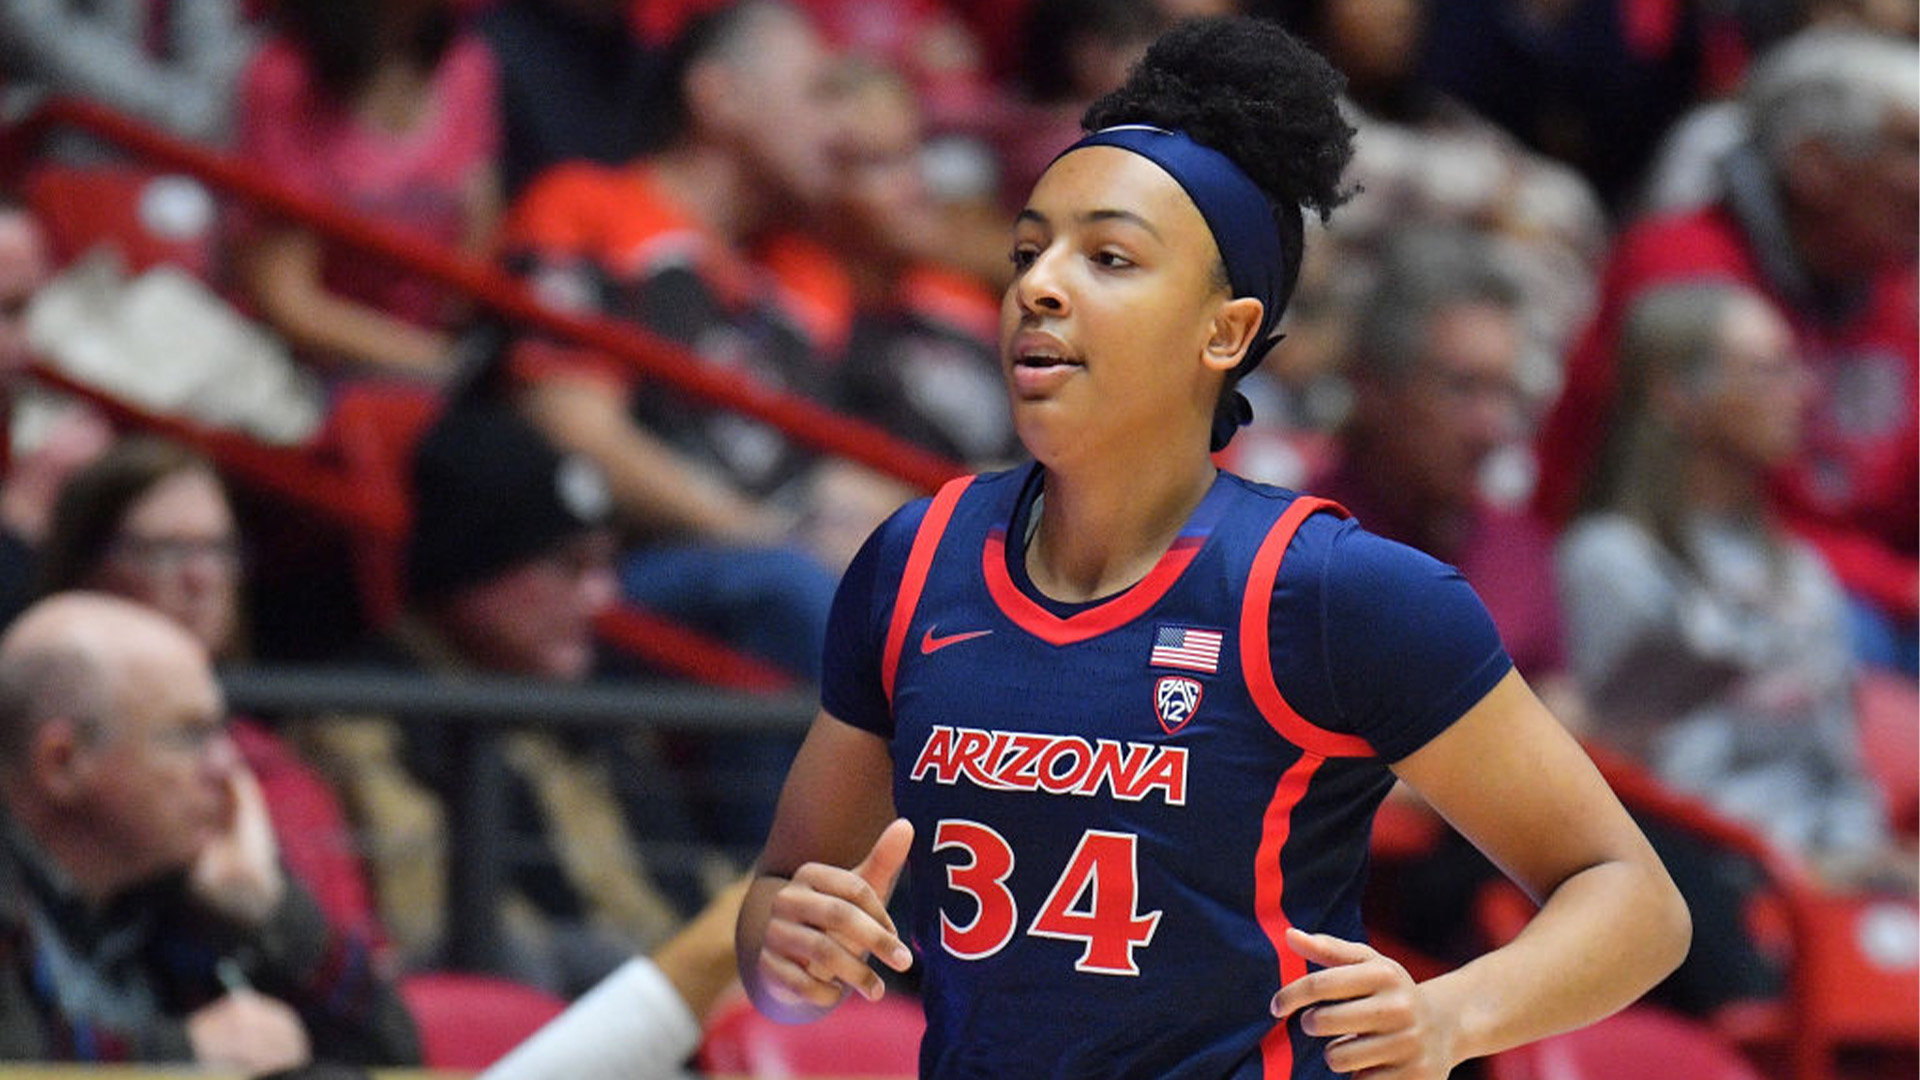 University Of Arizona Women's Basketball Star Maya Nnaji Announces Departure From Athletics To Pursue Dreams Of Becoming A Physician